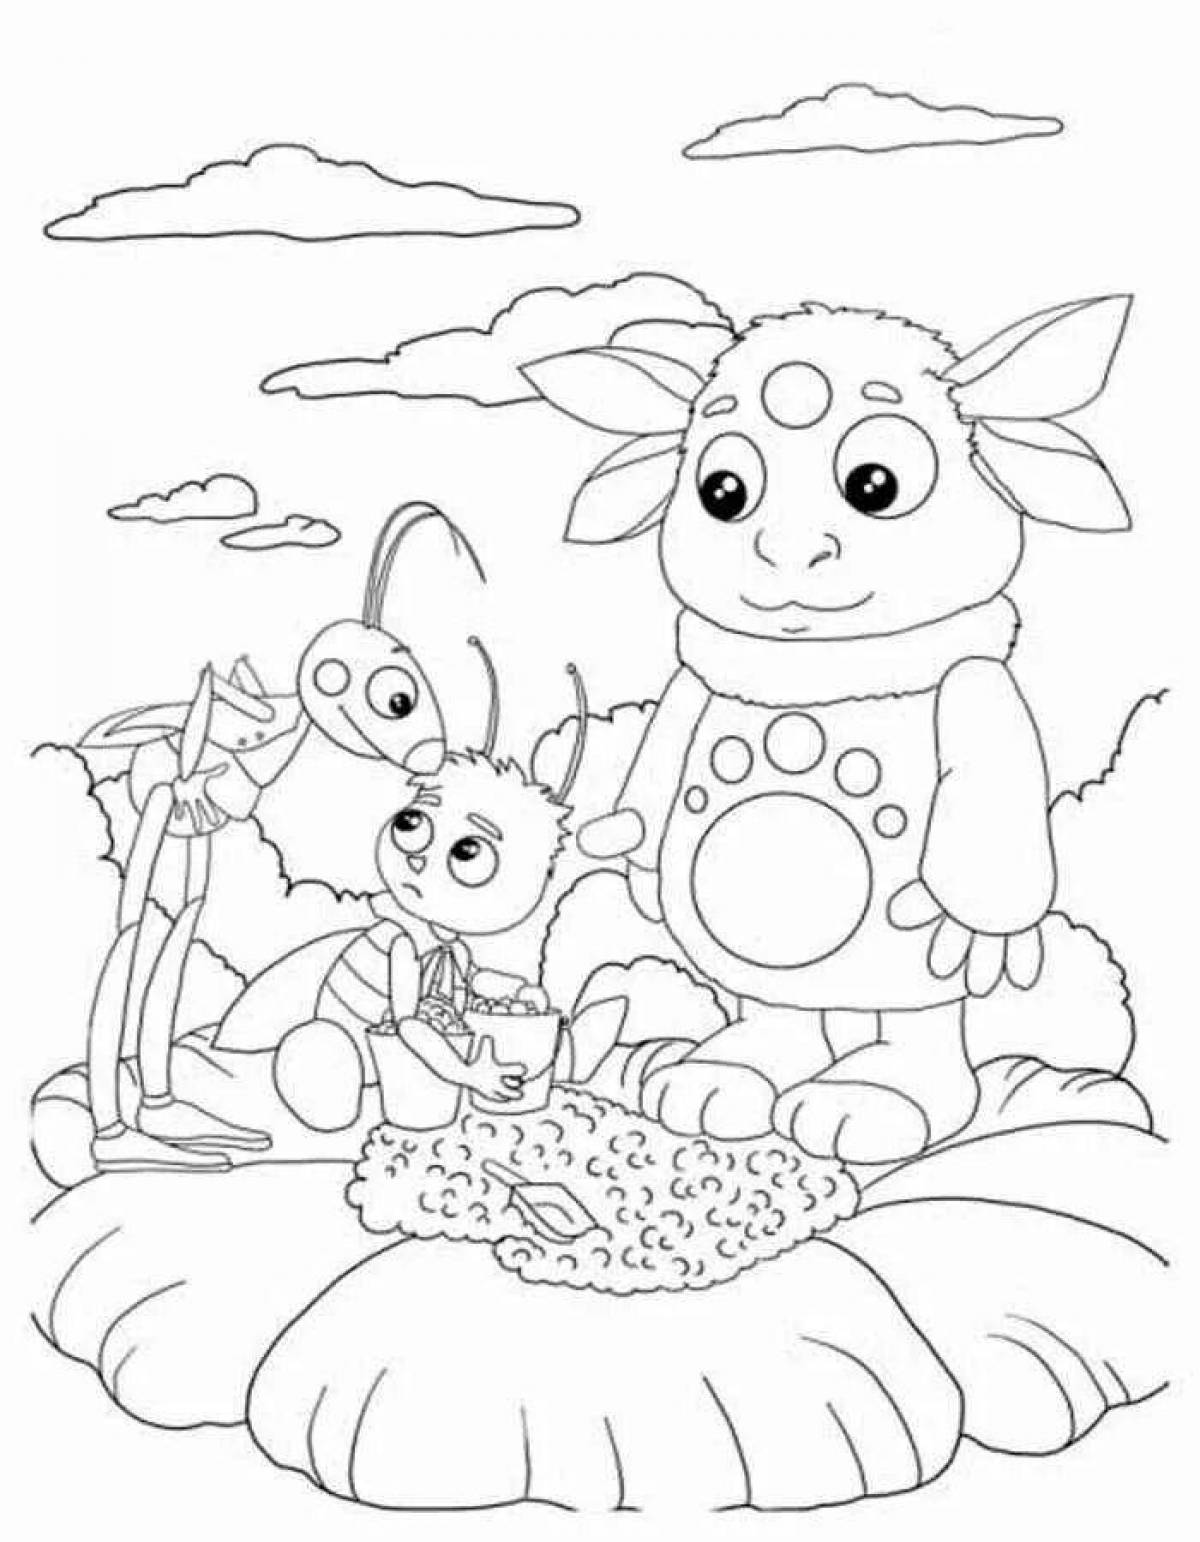 Coloring book happy bees